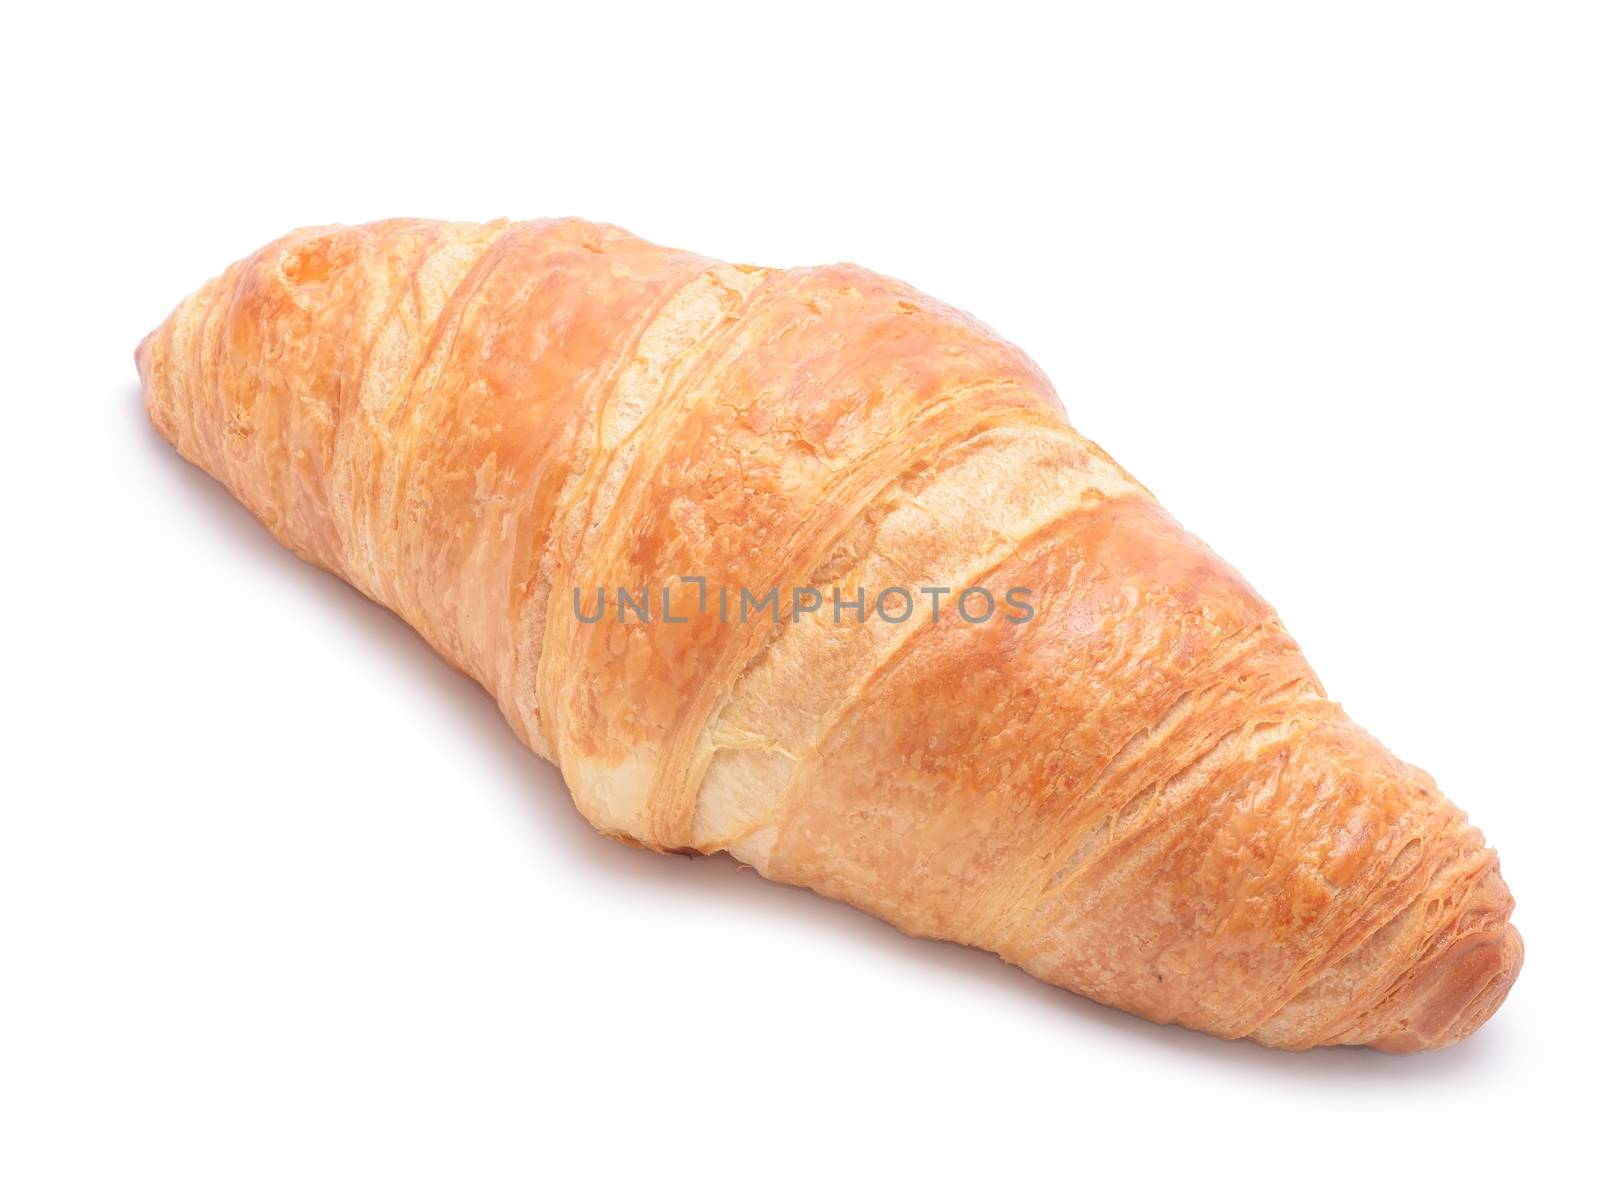 Croissant on white background by comet